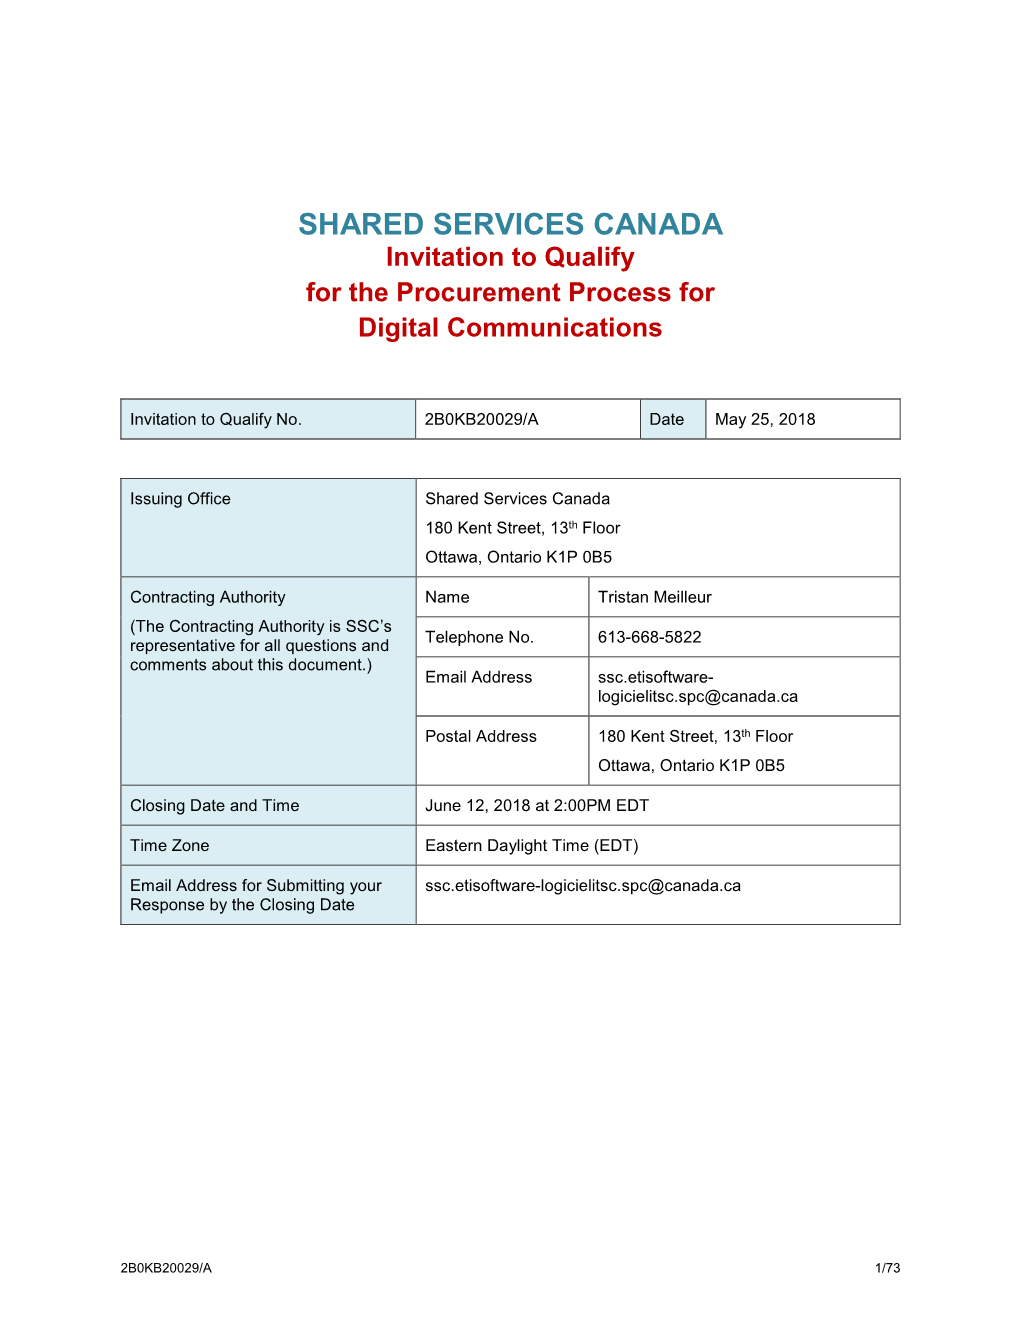 SHARED SERVICES CANADA Invitation to Qualify for the Procurement Process for Digital Communications